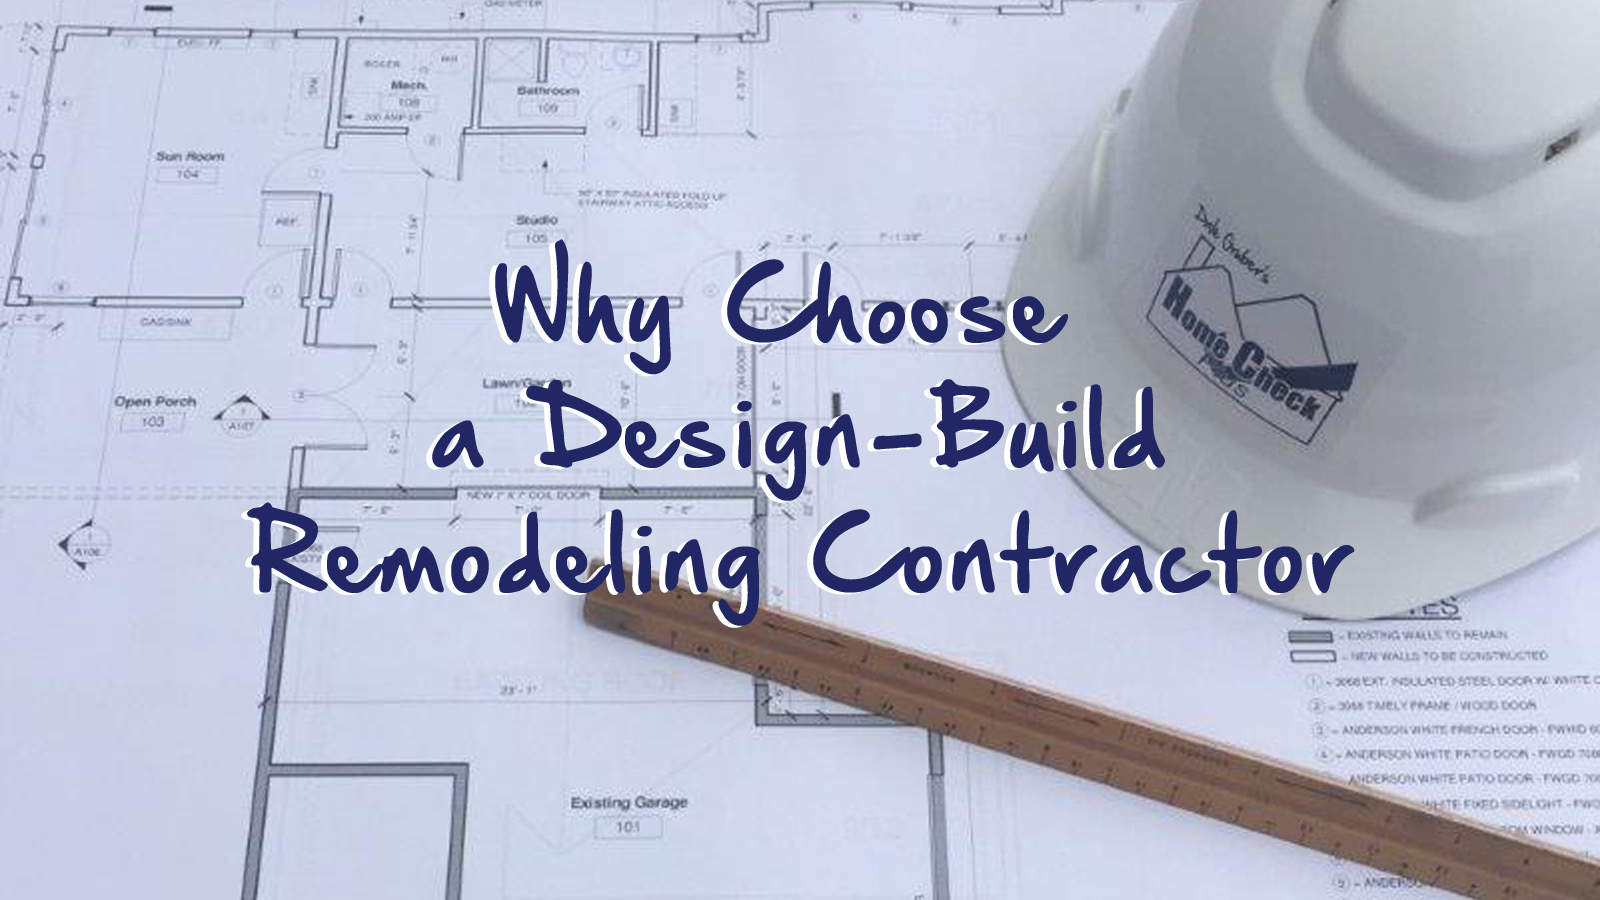 Why Choose a Design-Build Remodeling Contractor